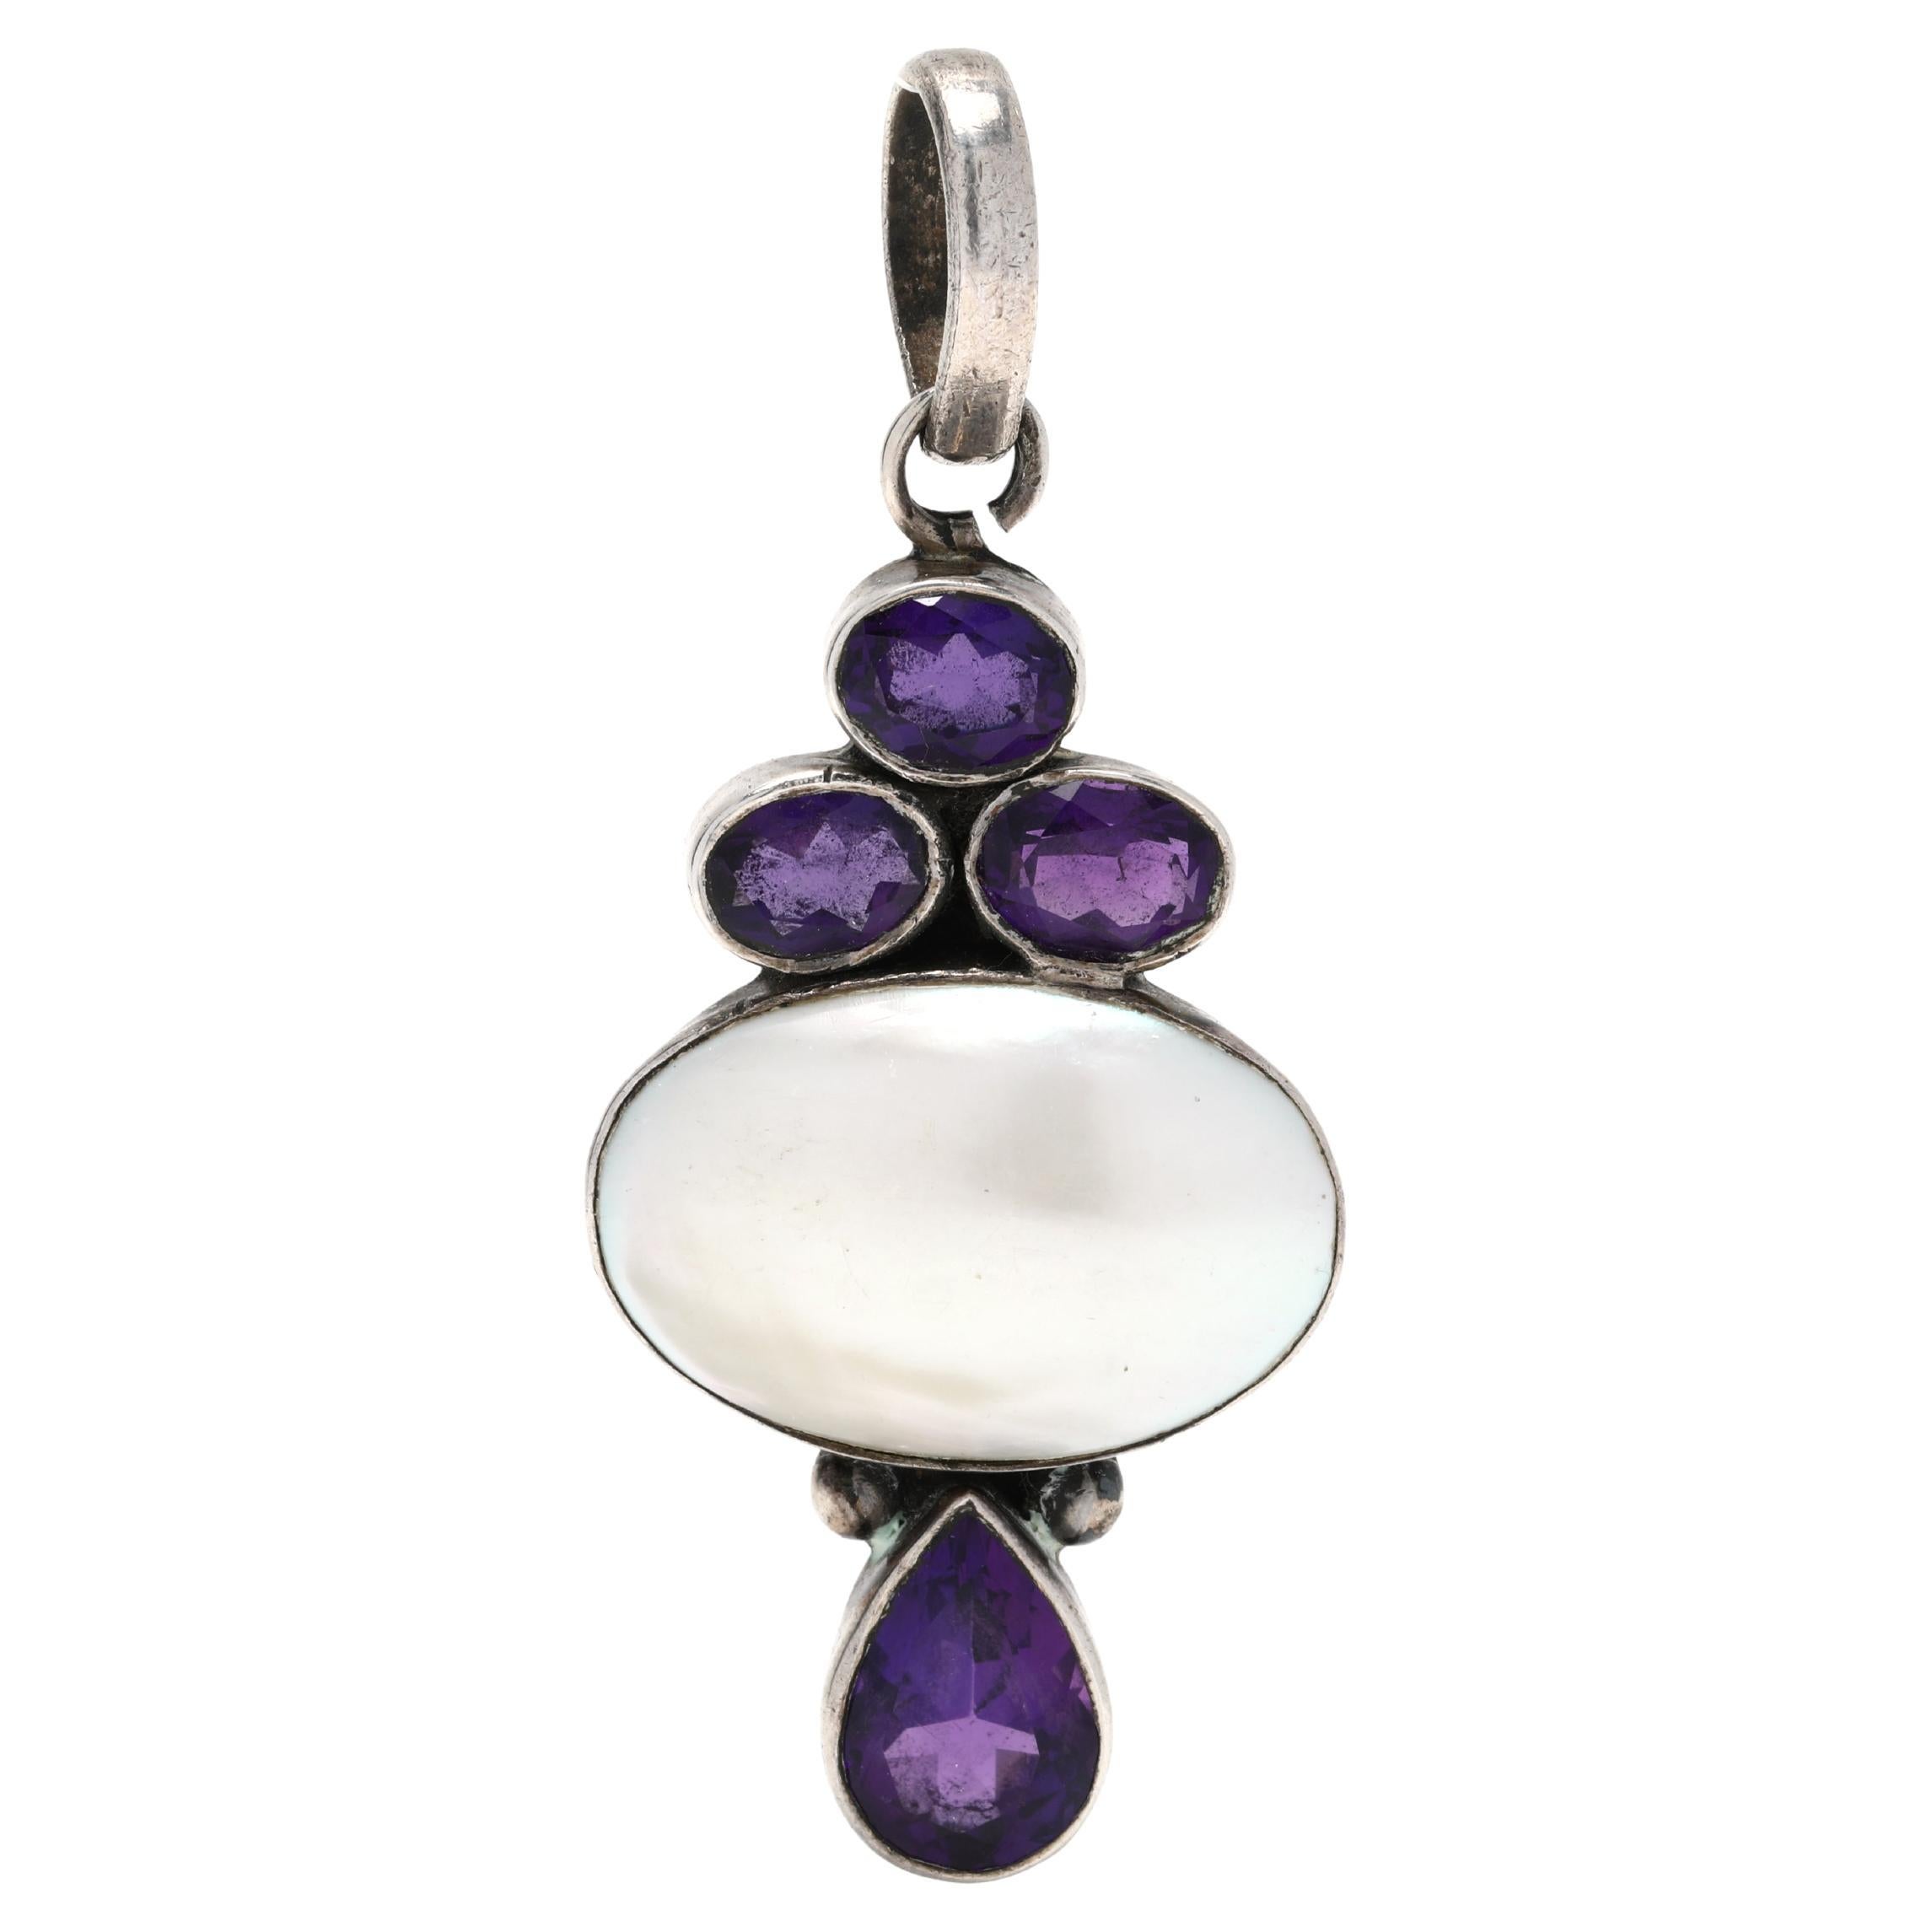 Vintage 3ctw Amethyst Mabé Pearl Long Pendant, Sterling Silver, Length 2.5 Inch